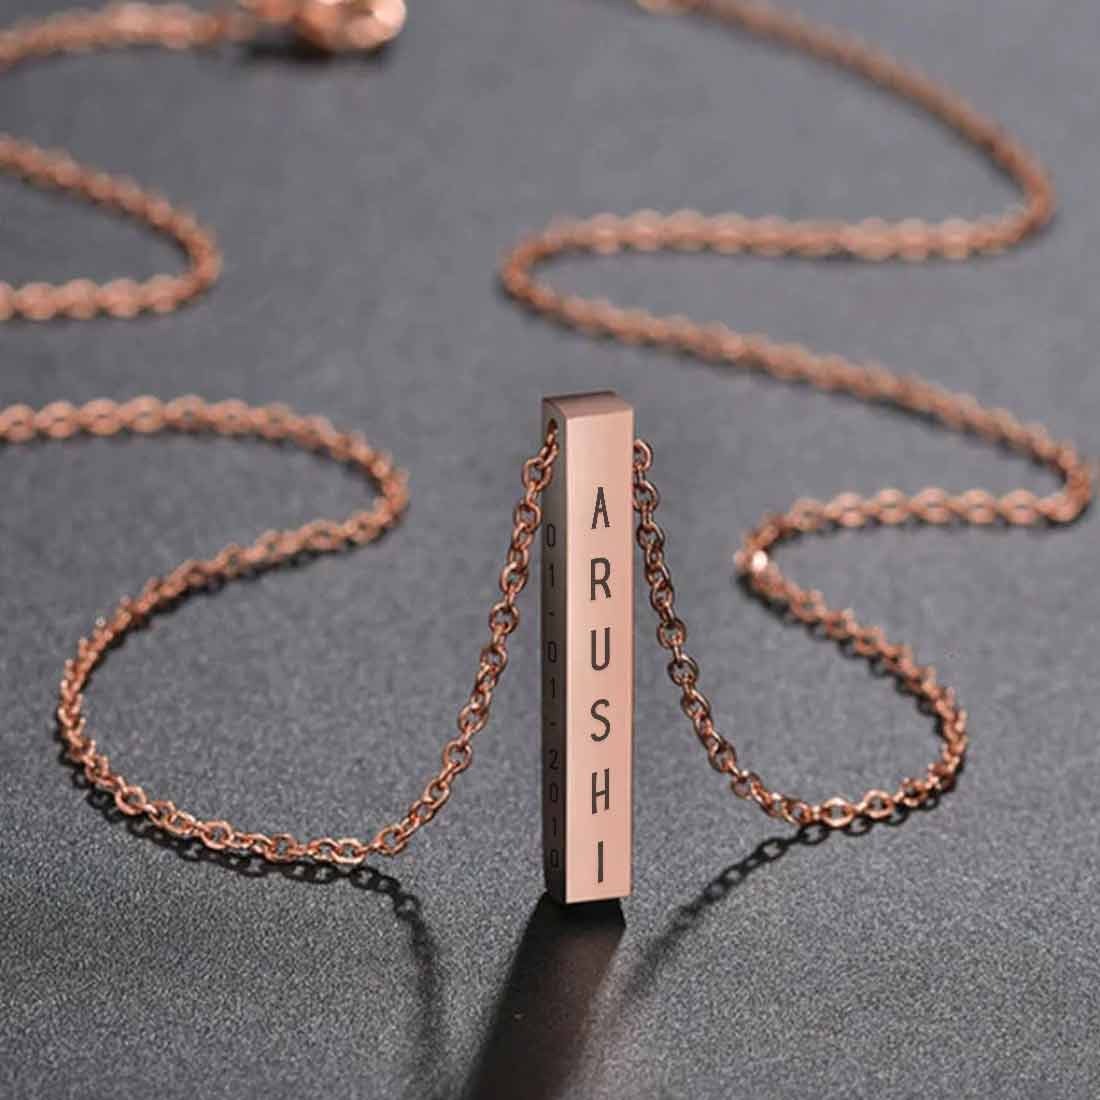 Customized Name Pendant With Chain Engraved Jewelry for Men Women - Add Name Date